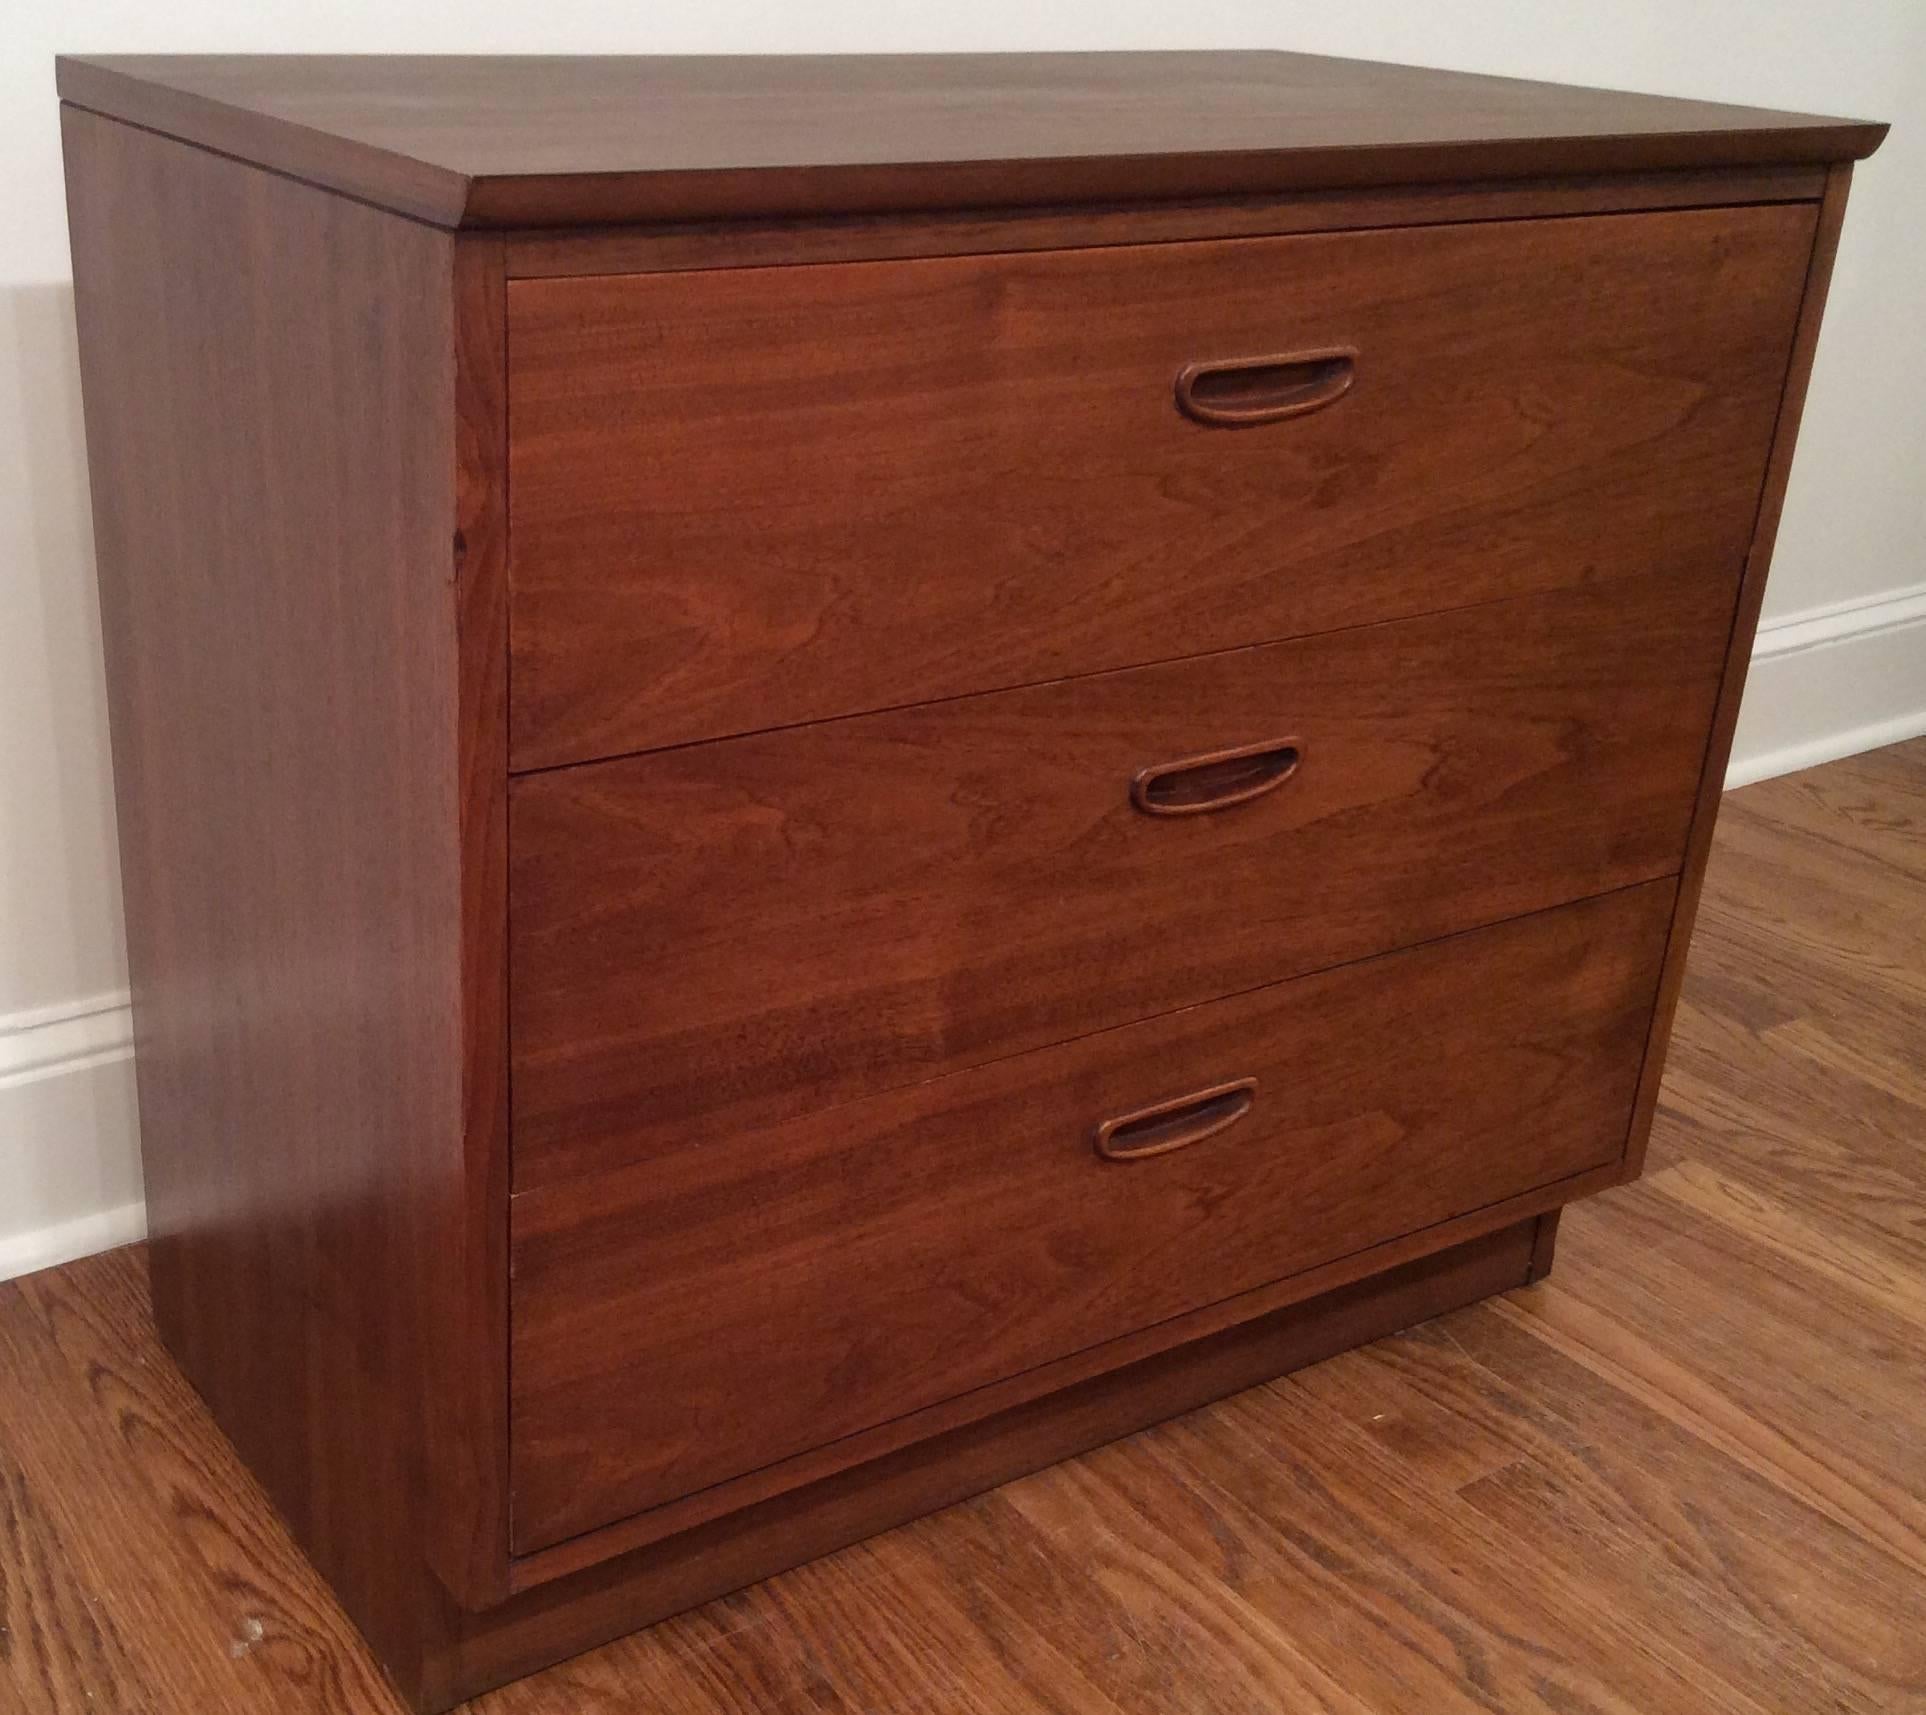 1960s three-drawer dresser by Lane. The wood grain is beautiful walnut and the top is Formica. The drawer handles are recessed and give the piece a modern appearance. Can be used as nightstands. We have two available and are listed separately on